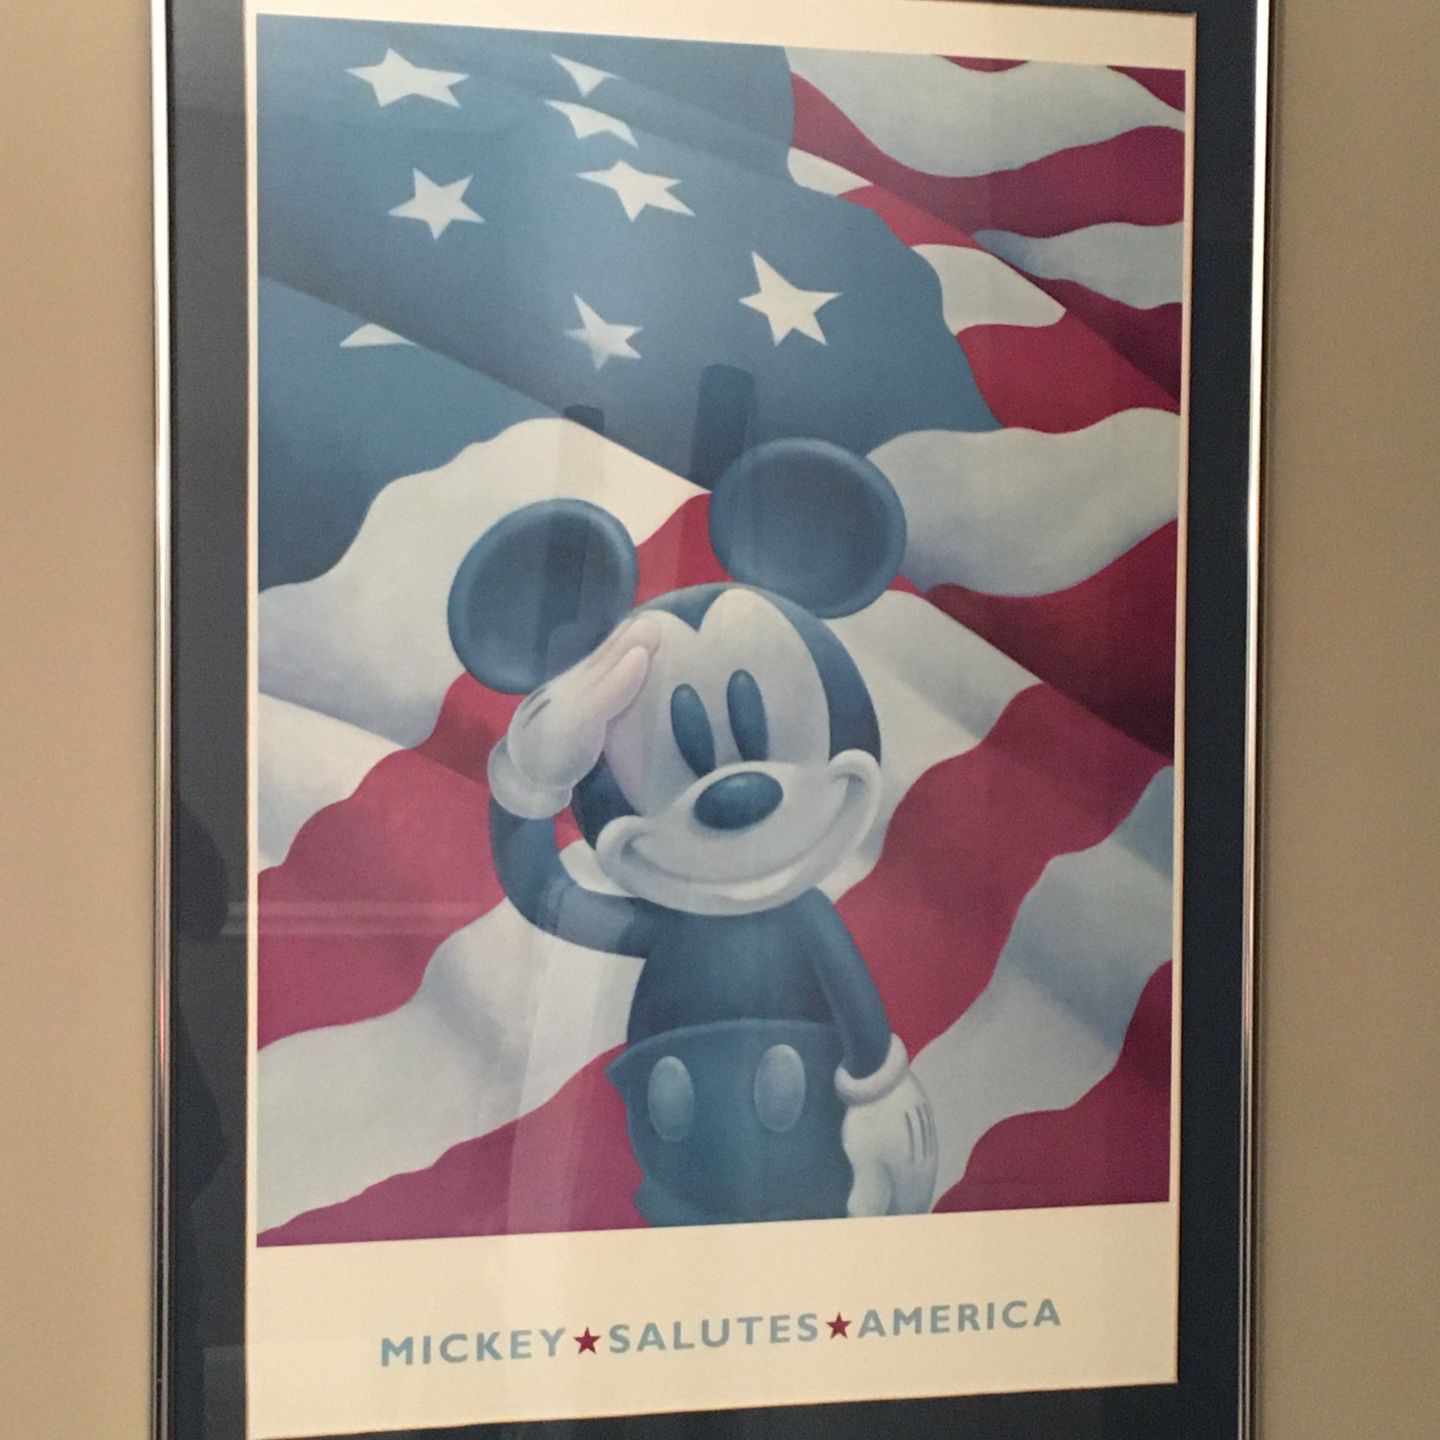 Mickey Mouse Salutes America Framed Disney Poster